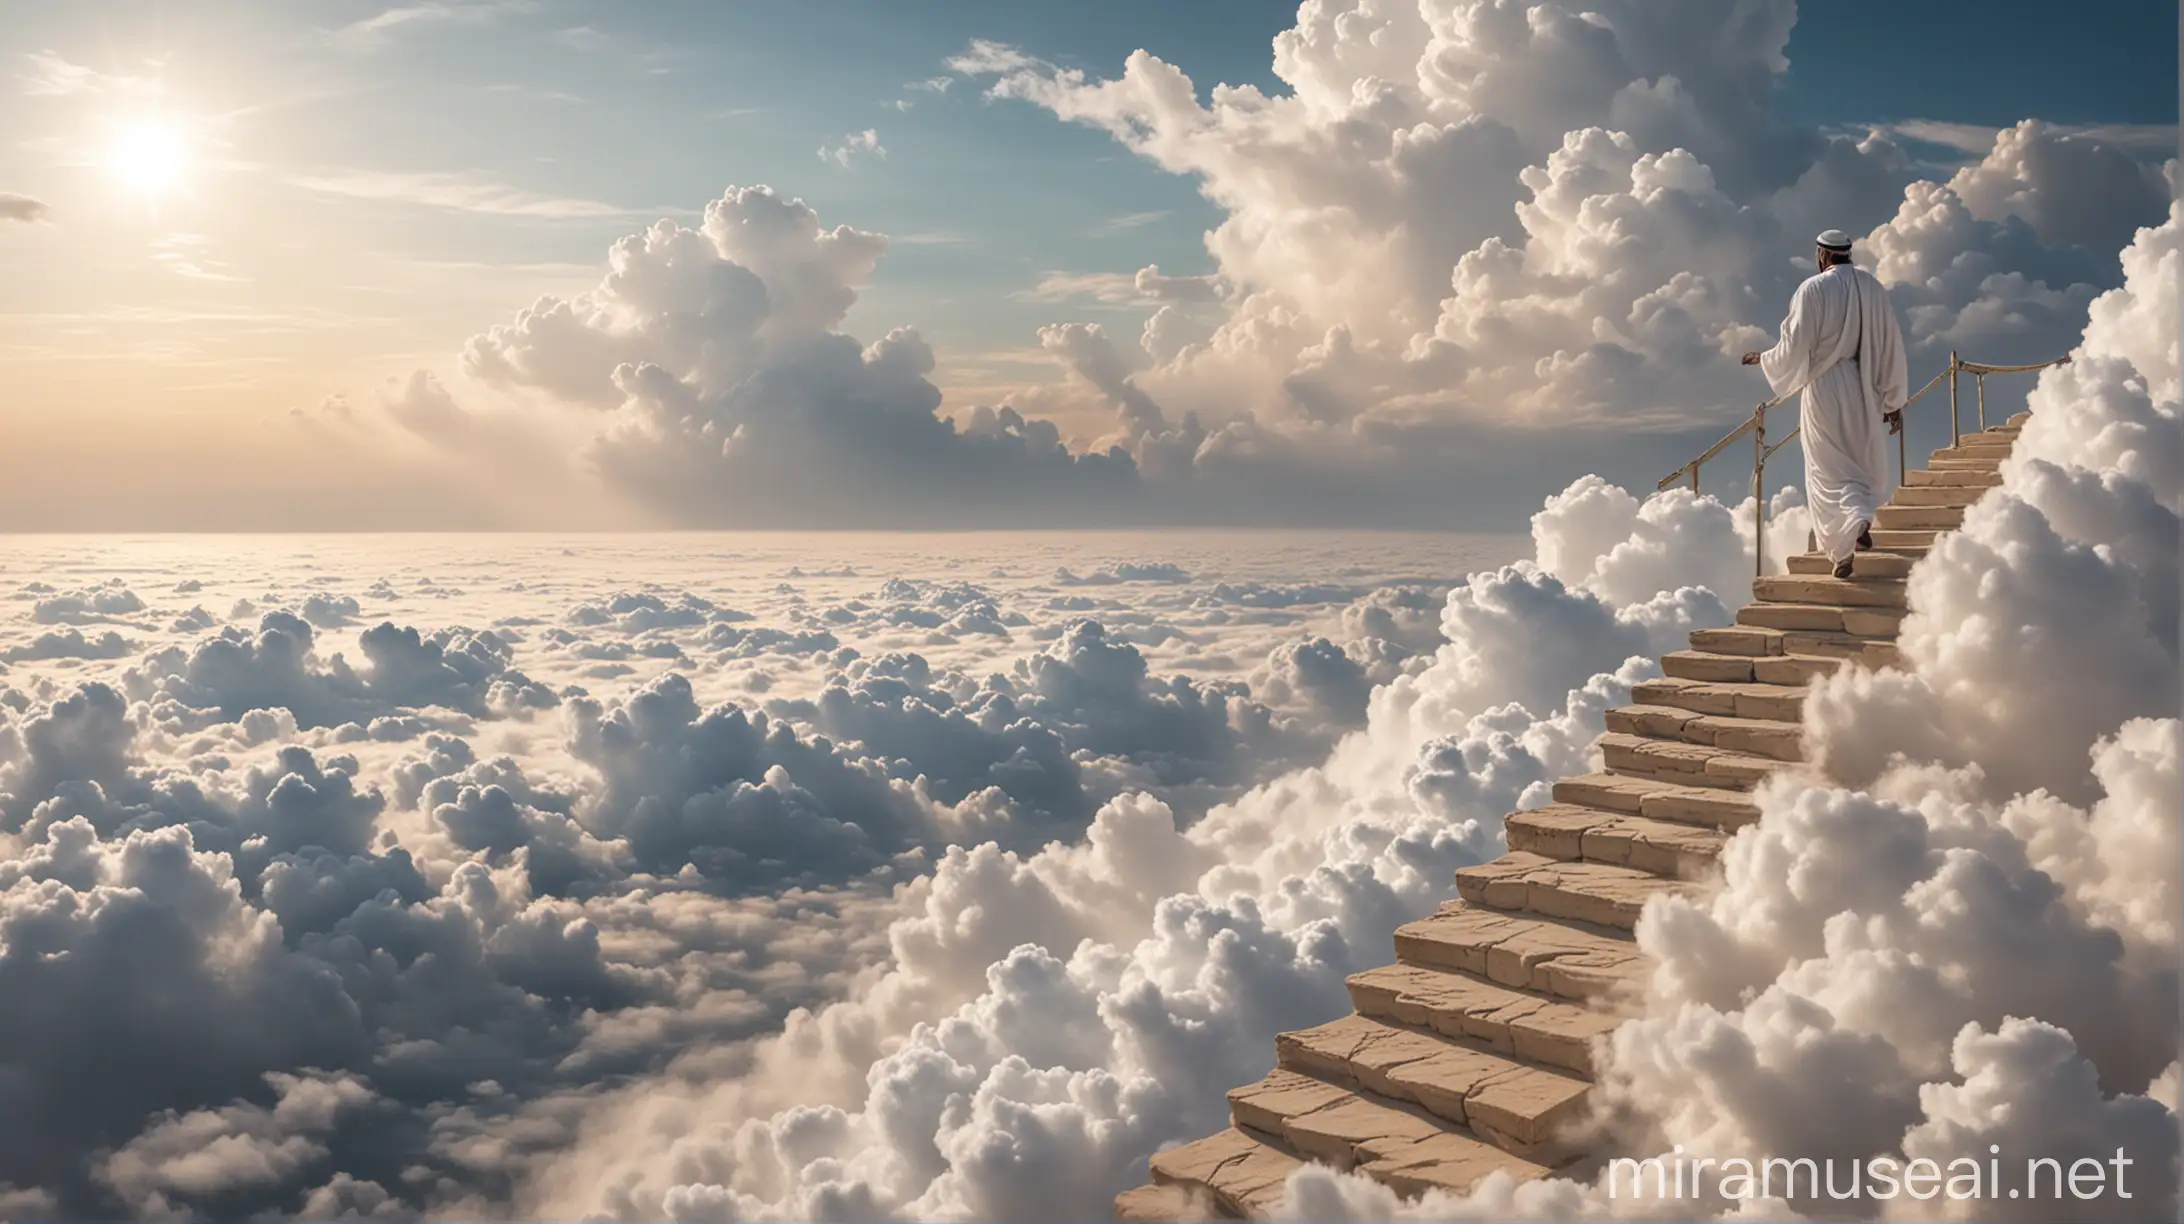 An Arab man dressed in white, at the time of the Prophet, climbed the stairs to the top of the clouds...